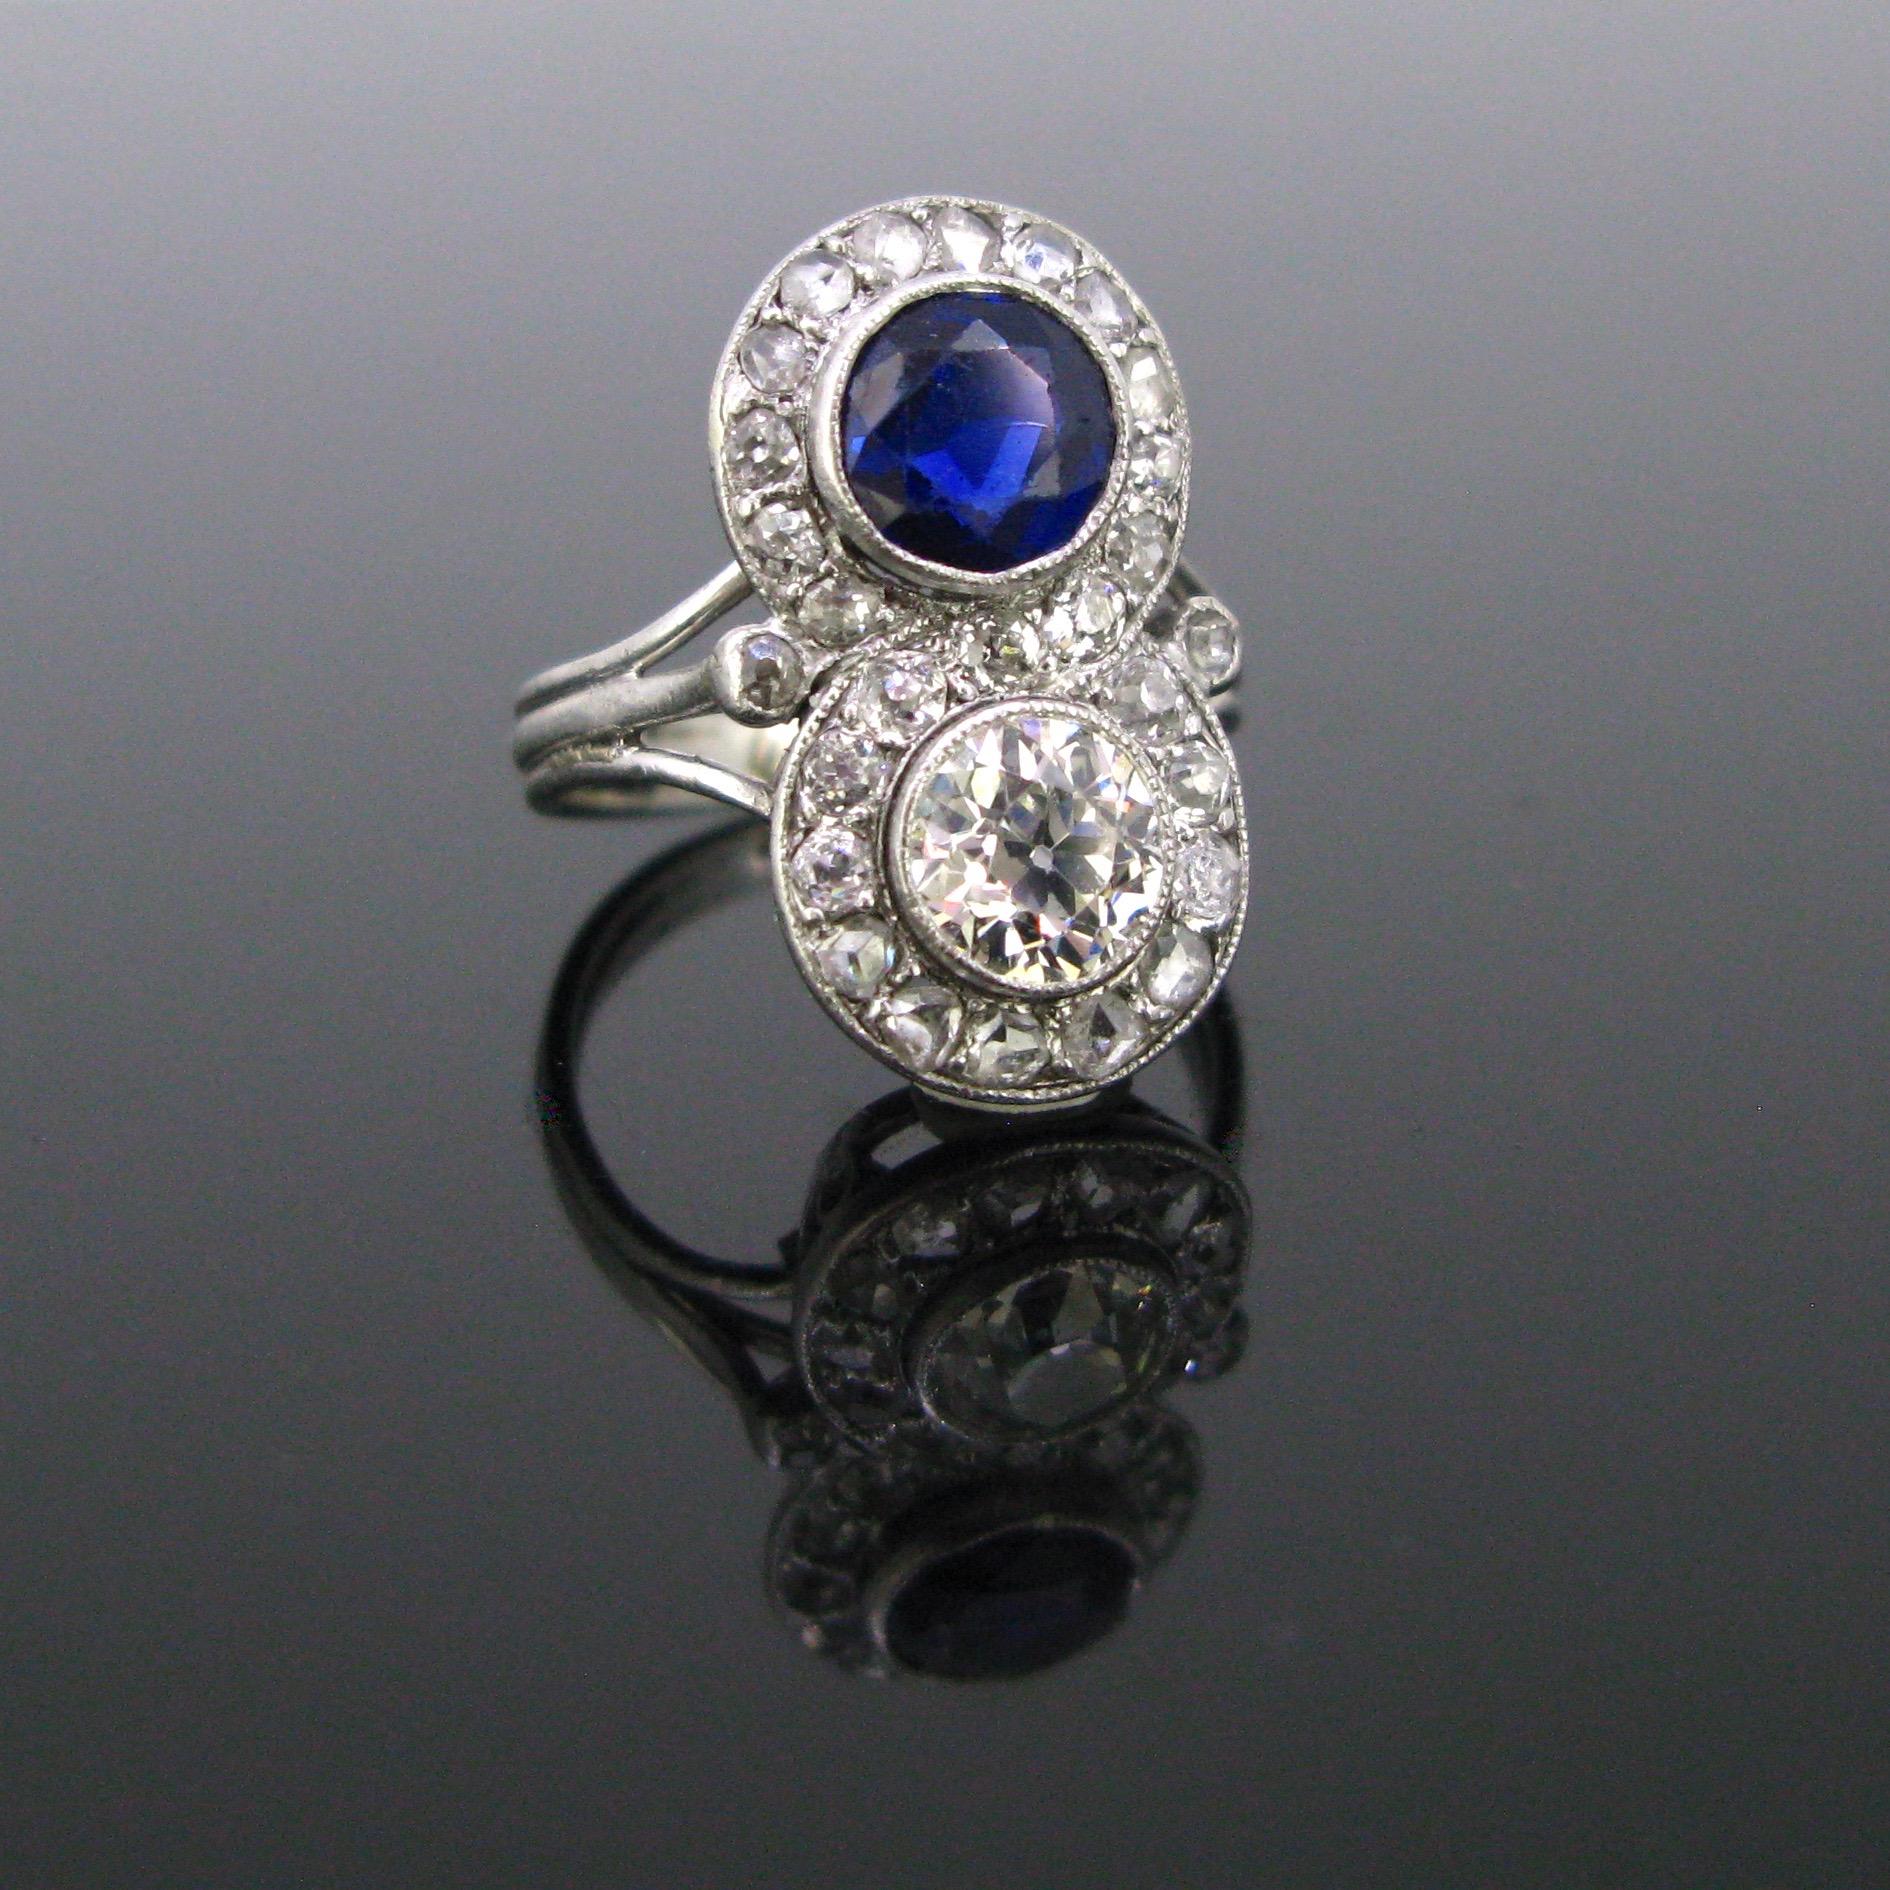 This beautiful ring comes directly from the Art Deco era. It features a round faceted sapphire weighing approx. 1ct and a diamond of around 0.70ct. Both the sapphire and the diamond are surrounded by 27 old cut diamonds forming a Toi et Moi design.